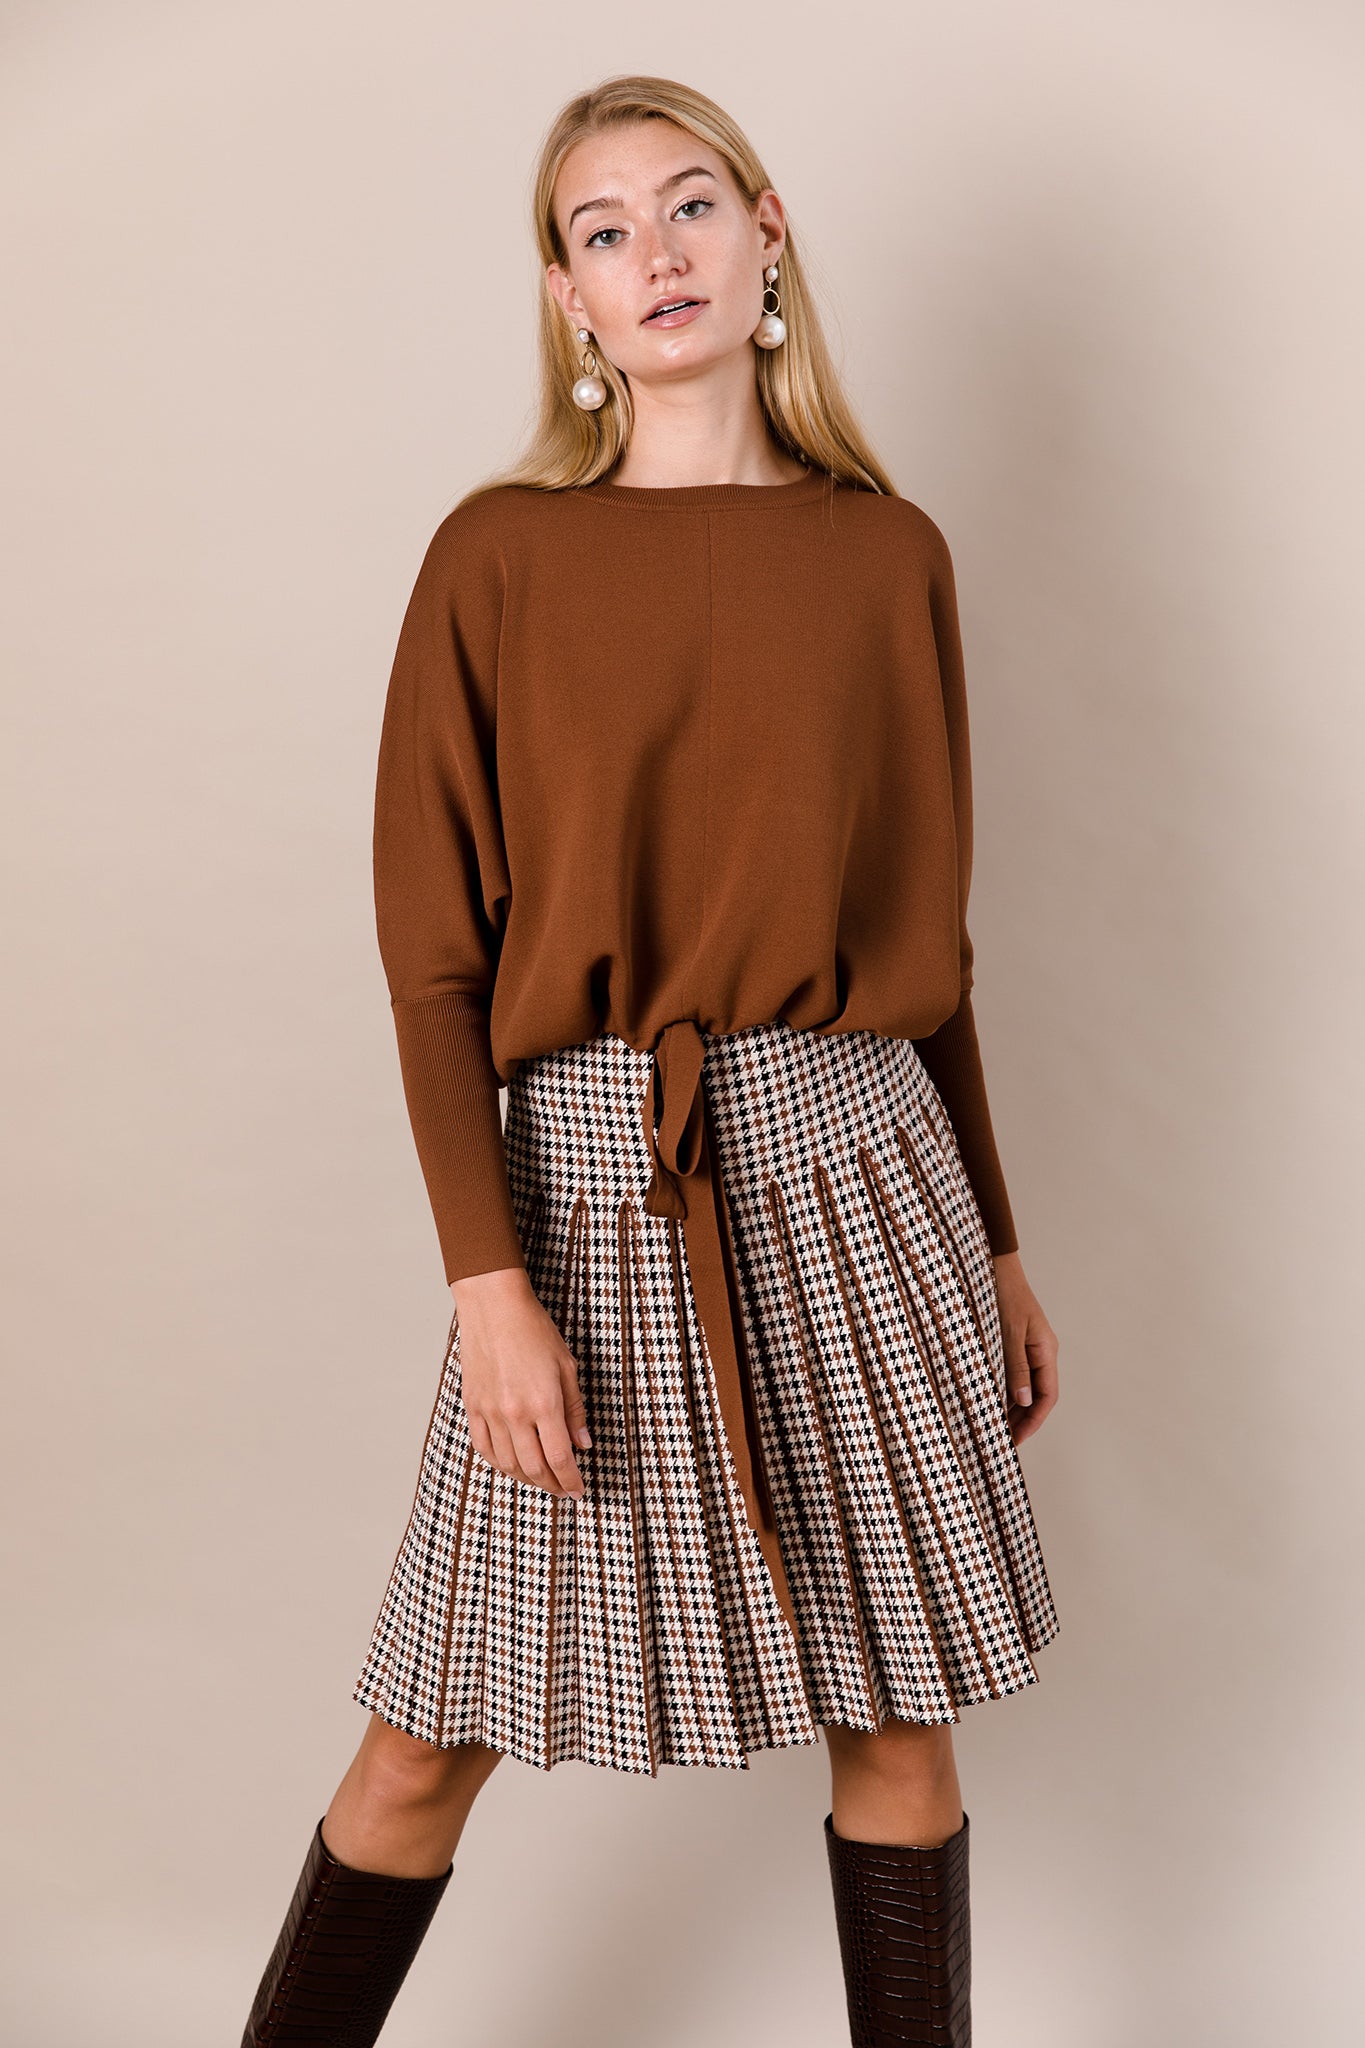 The Infinity Skirt in Caramel Plaid